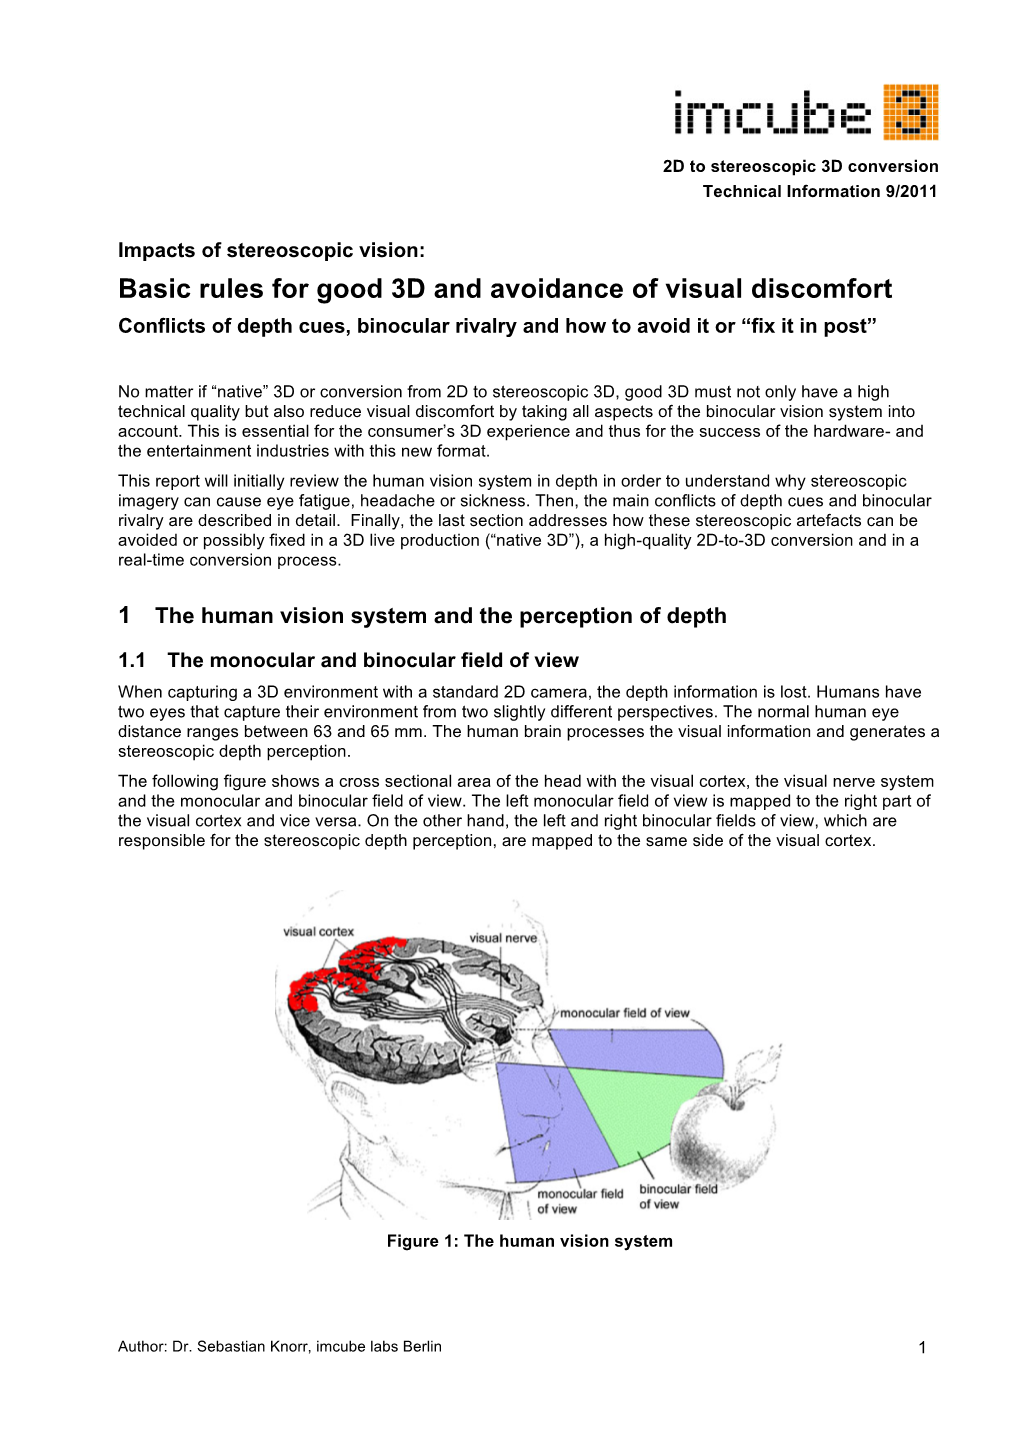 Impacts of Stereoscopic Vision